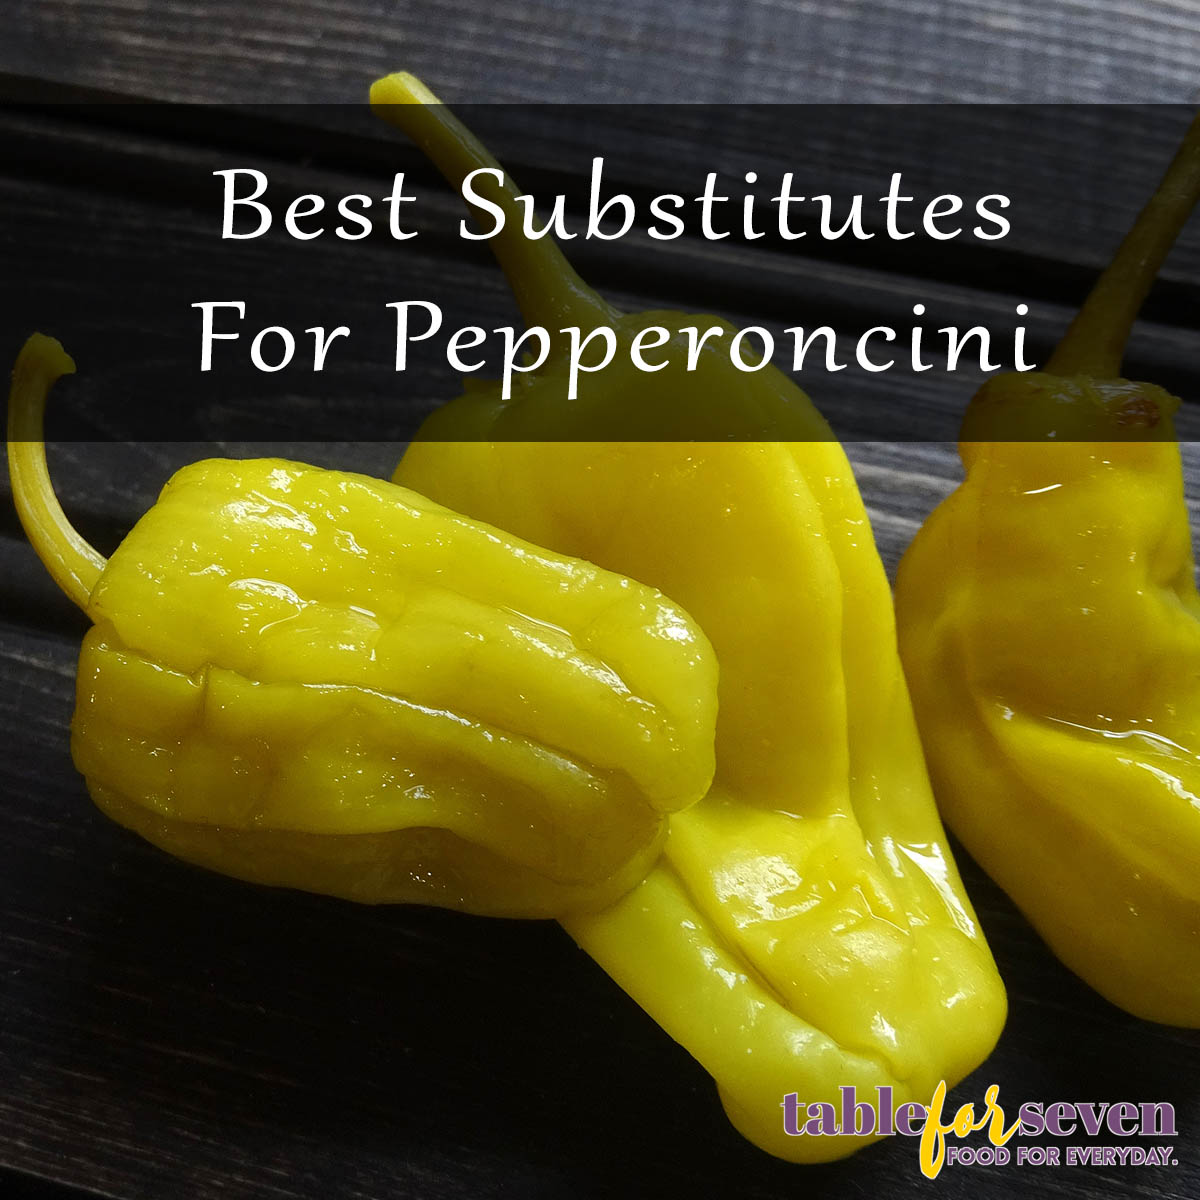 7 Best Substitutes For Pepperoncini